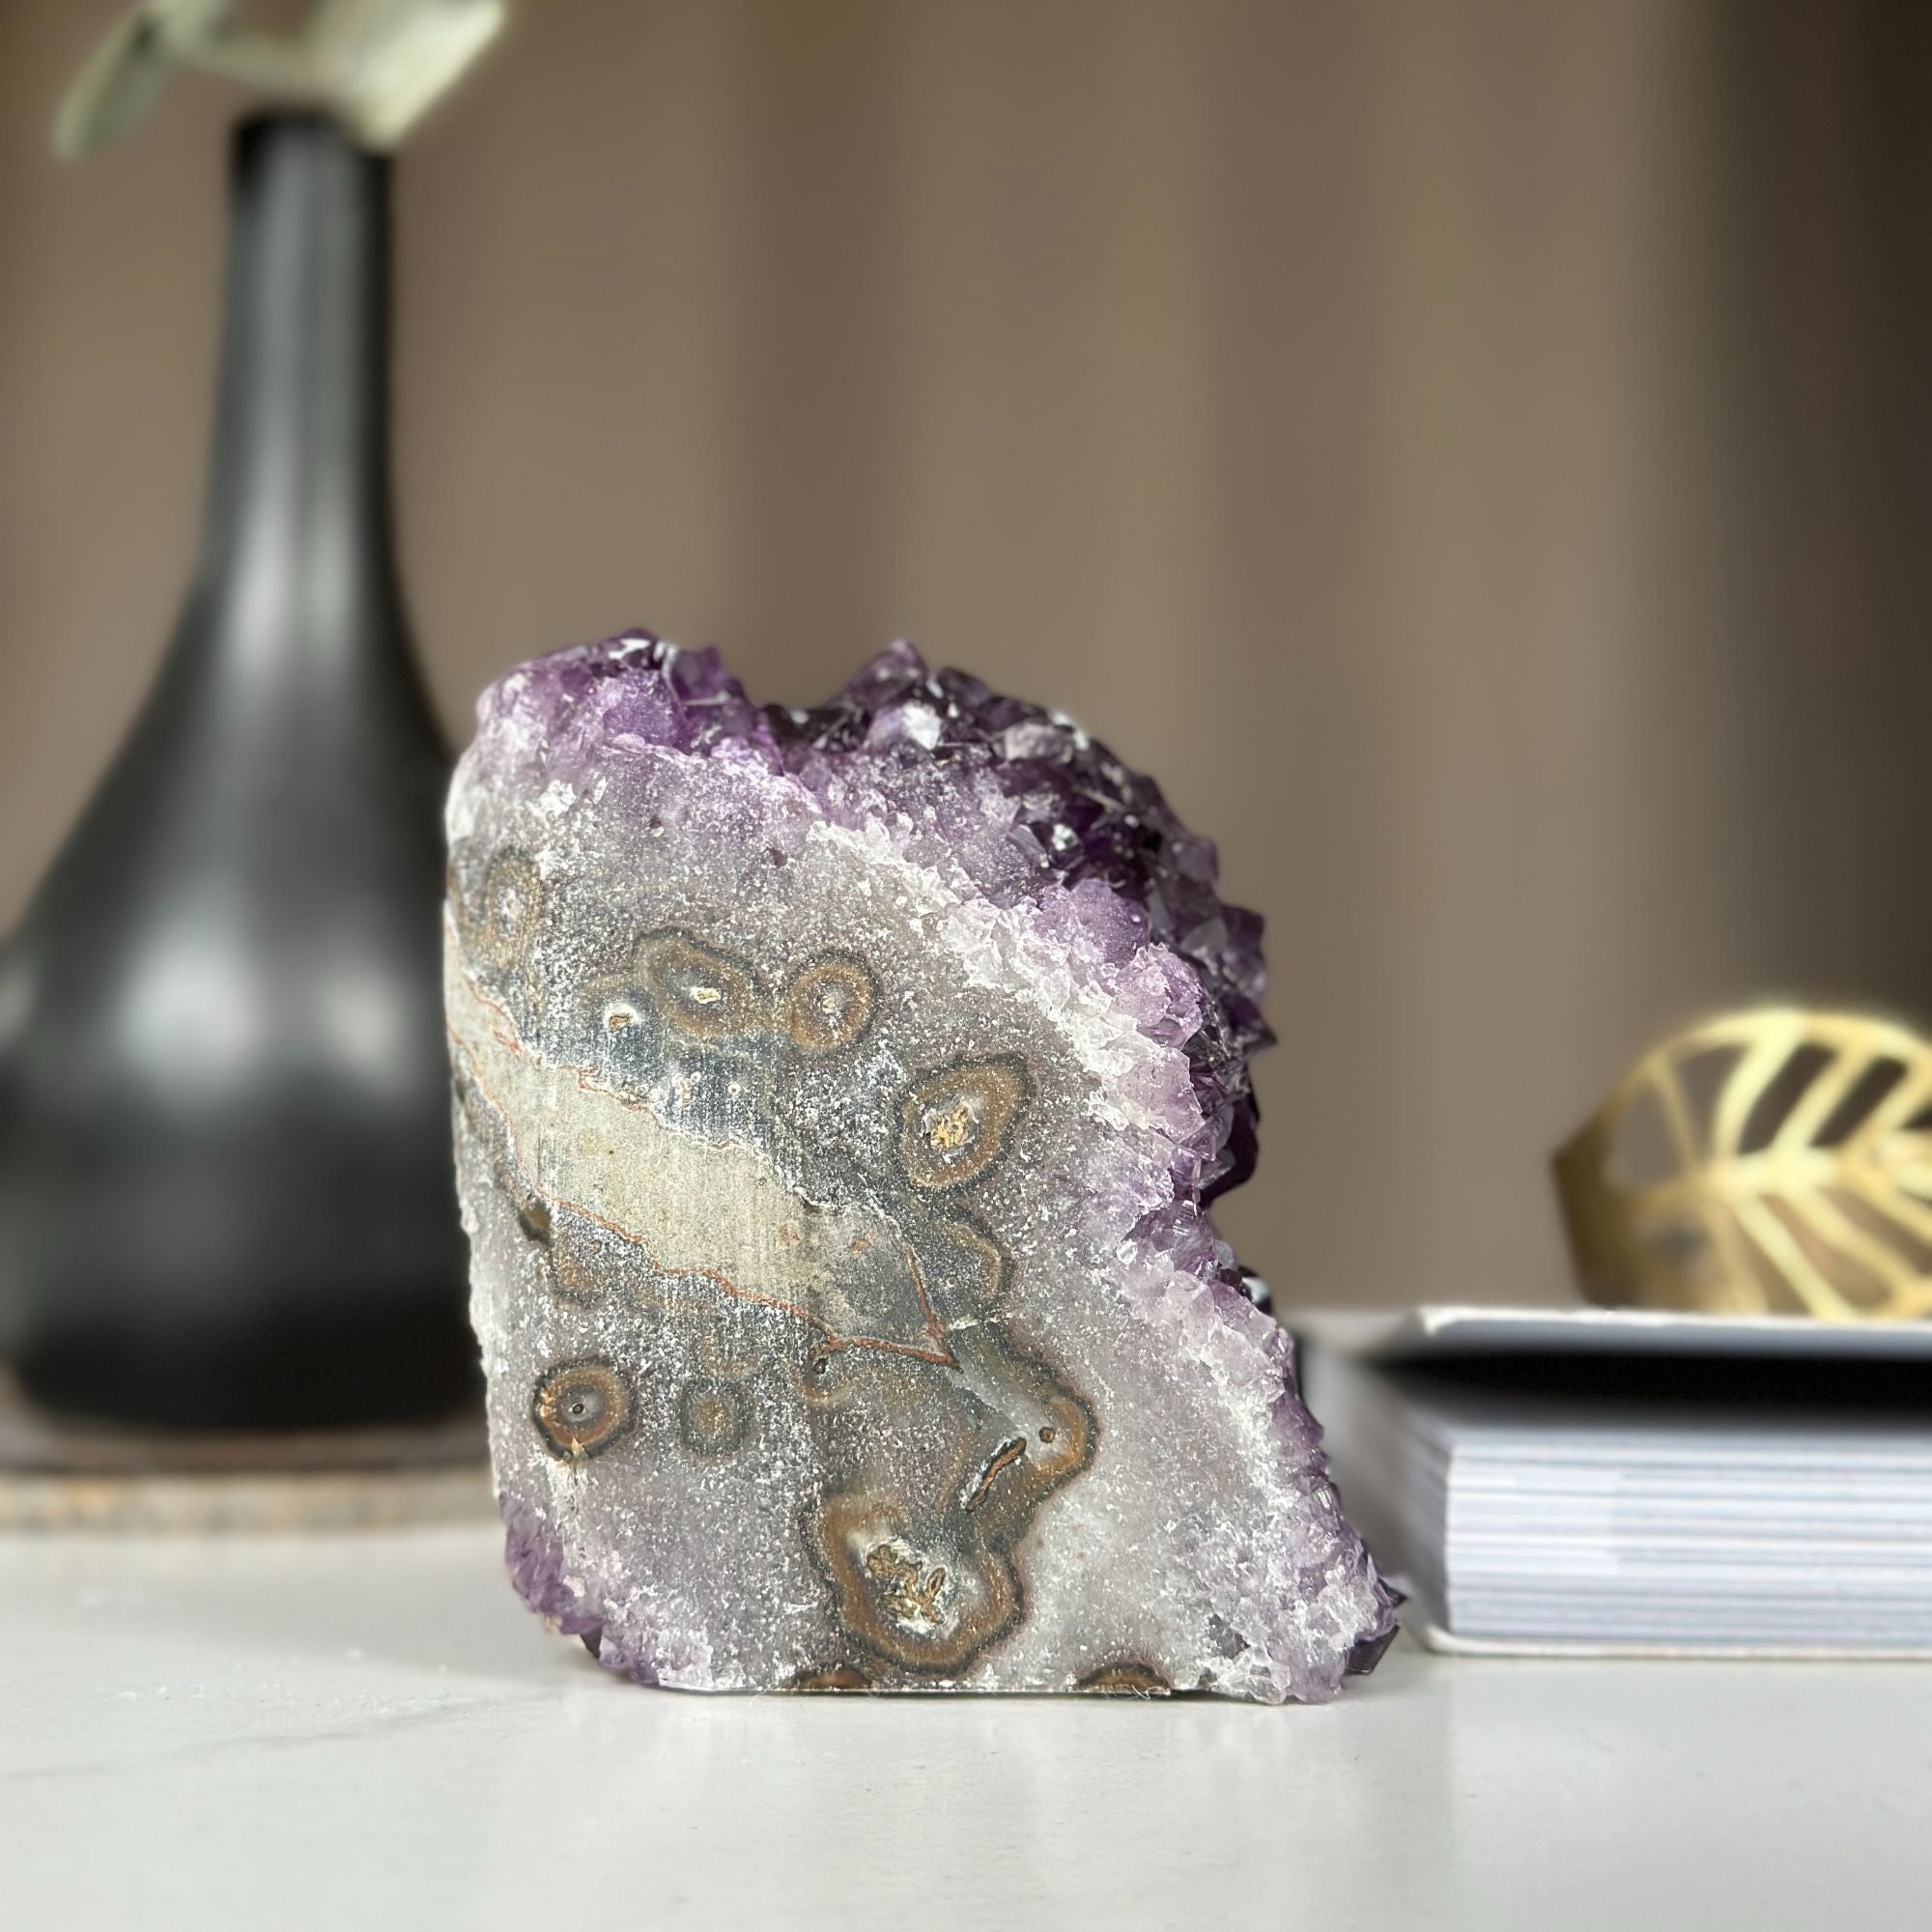 Amethyst cathedral geode, Amethyst self standing, Unique crystal cluster